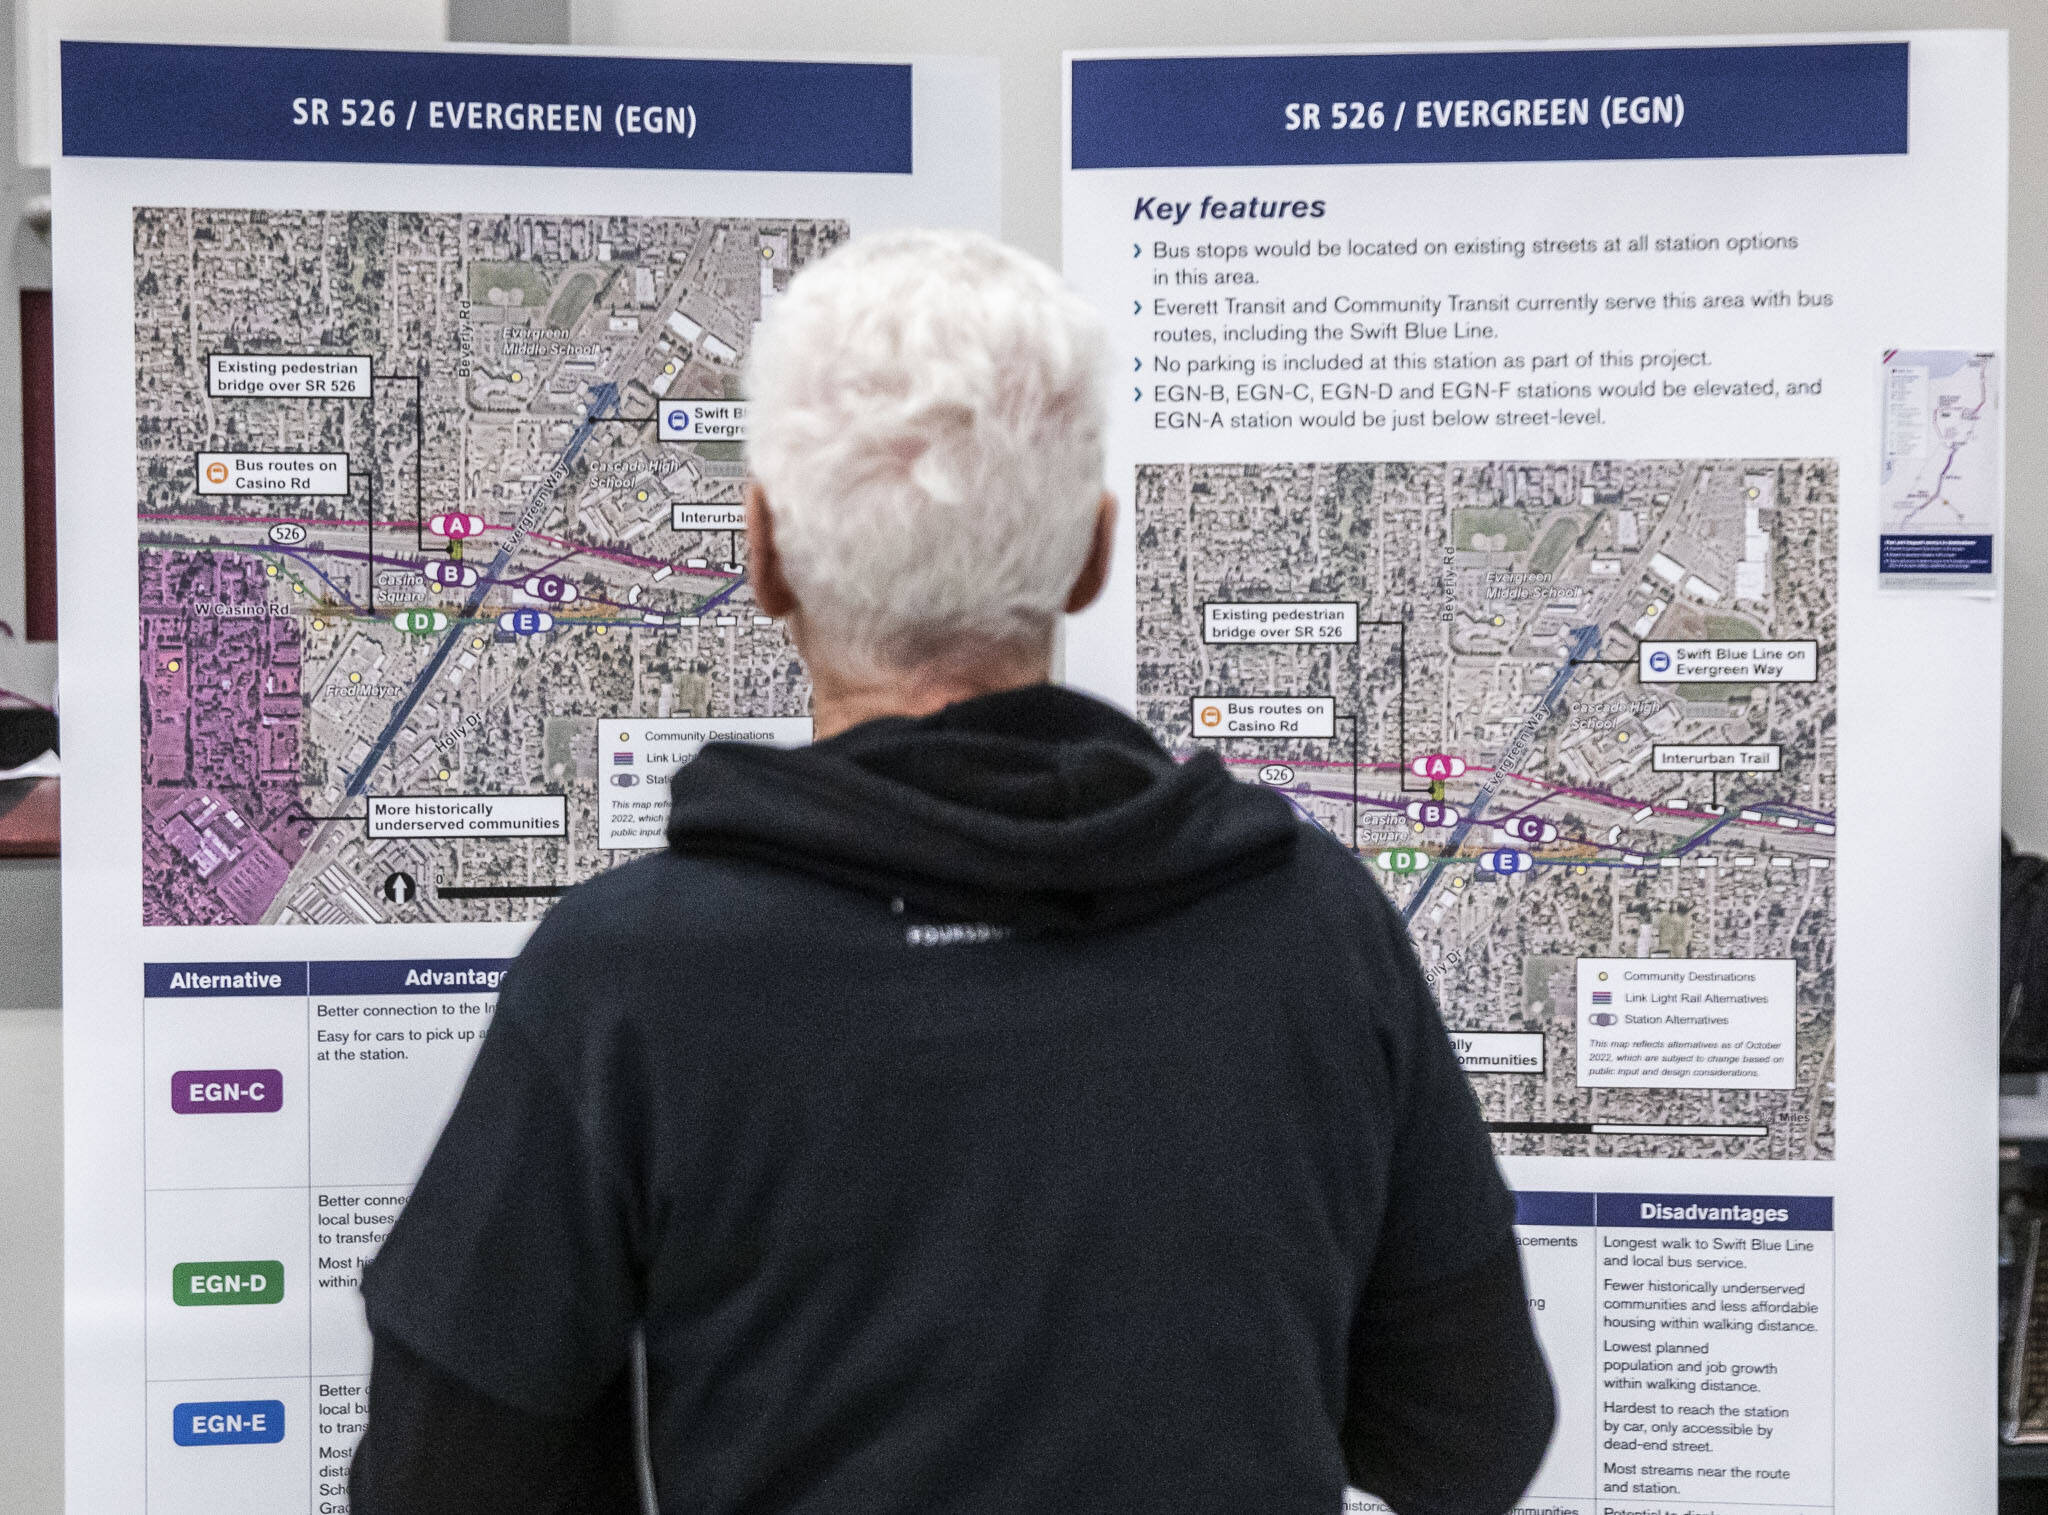 A man stops to look through the proposed Link light rail station for SR 526 and Evergreen Way on Wednesday, Feb. 15, 2023 in Everett, Washington. (Olivia Vanni / The Herald)